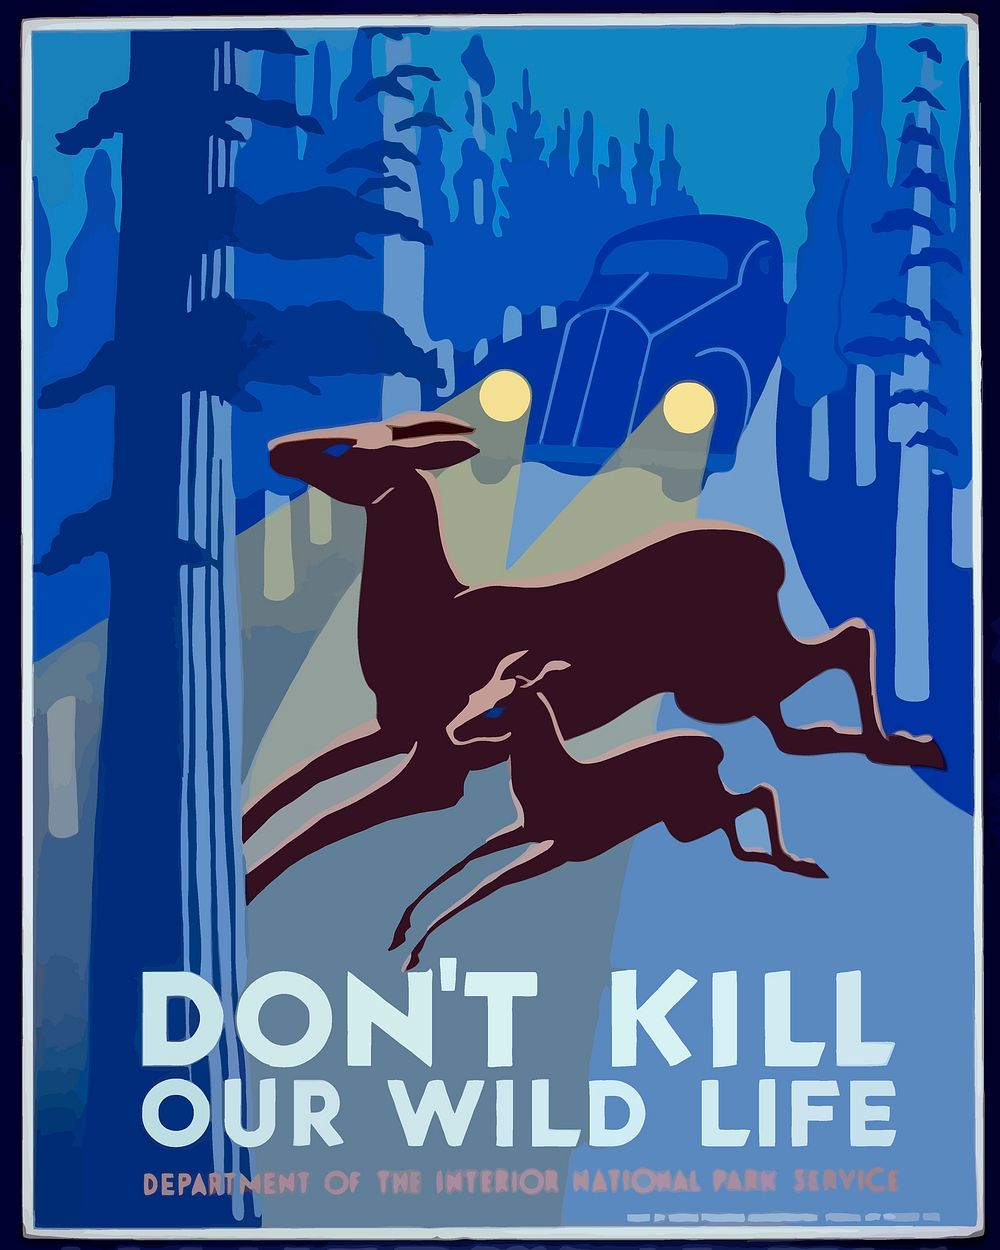 Don't kill our wild life collage element psd. Free public domain CC0 image.